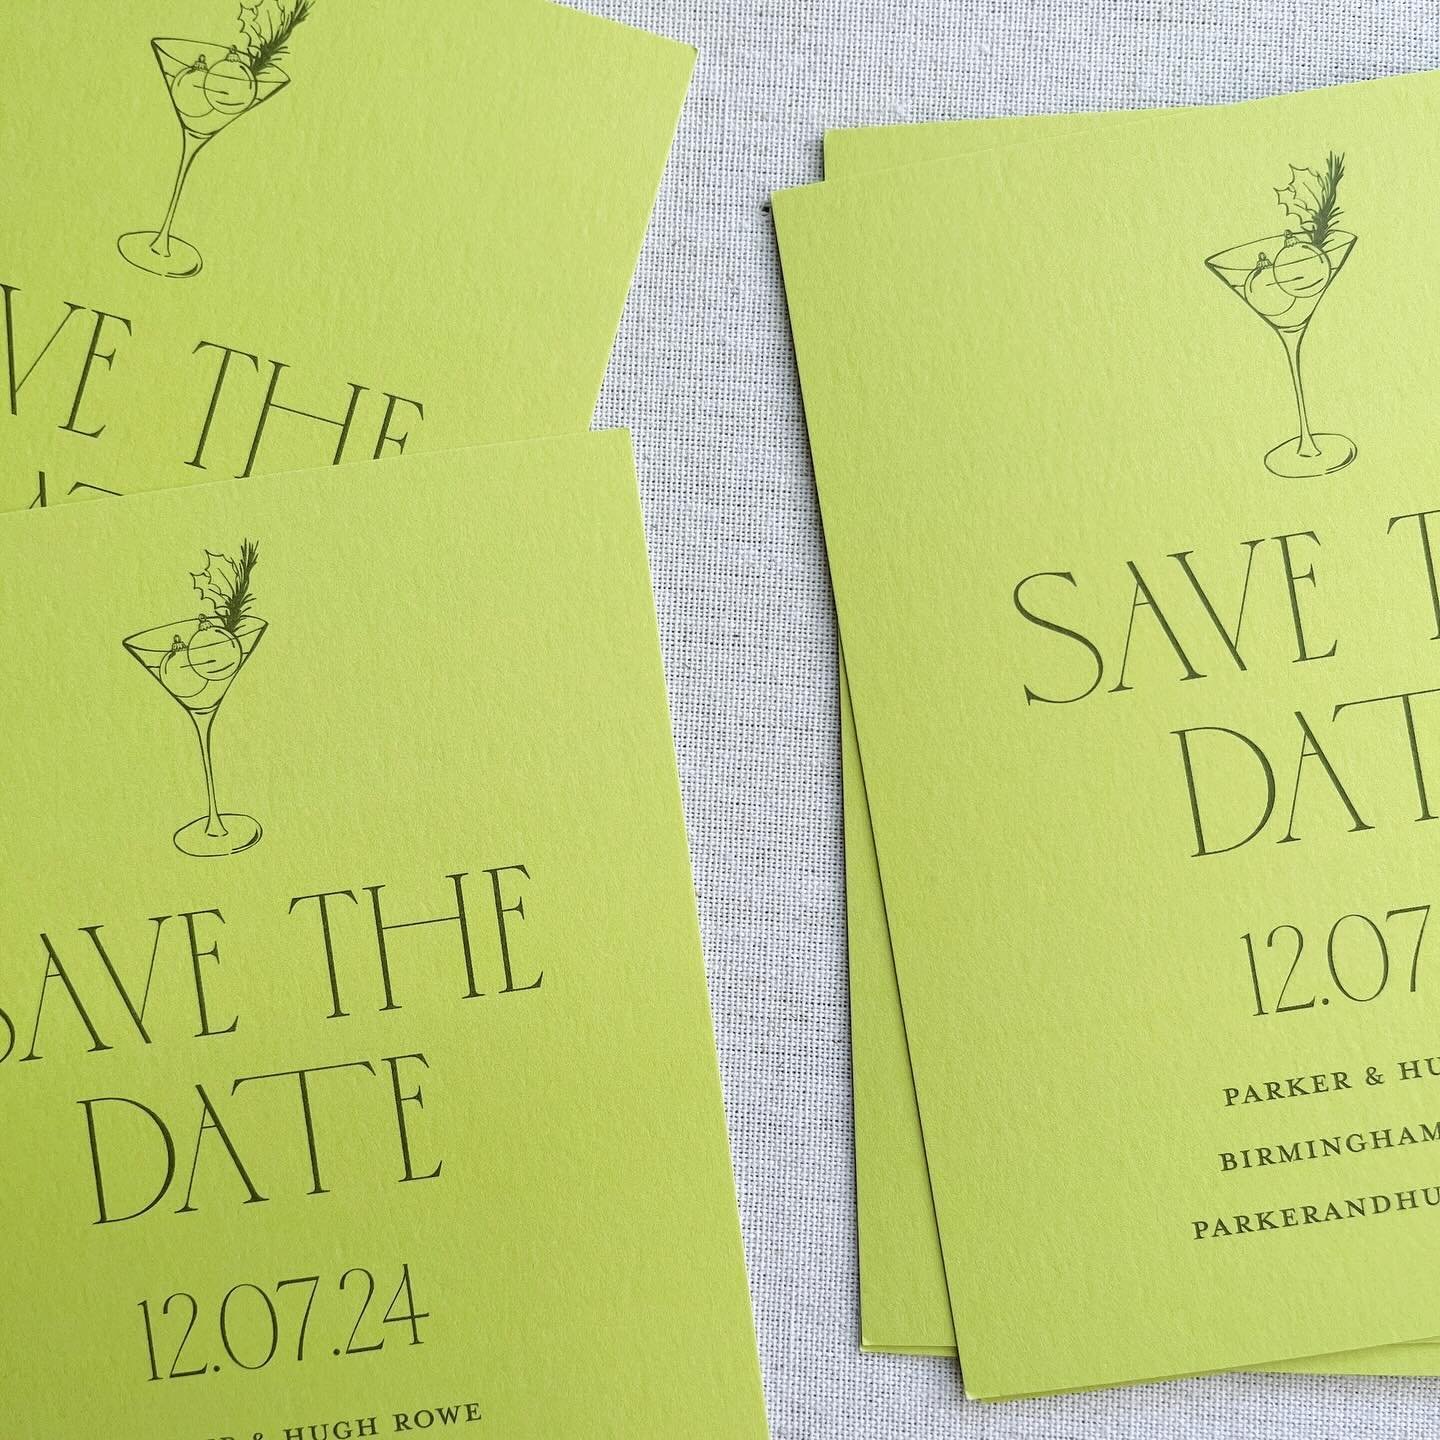 Christmas in April? Two Ornament Martinis please!! 🍸🍸

#savethedate #weddingstationery #stationery #christmaswedding #trending